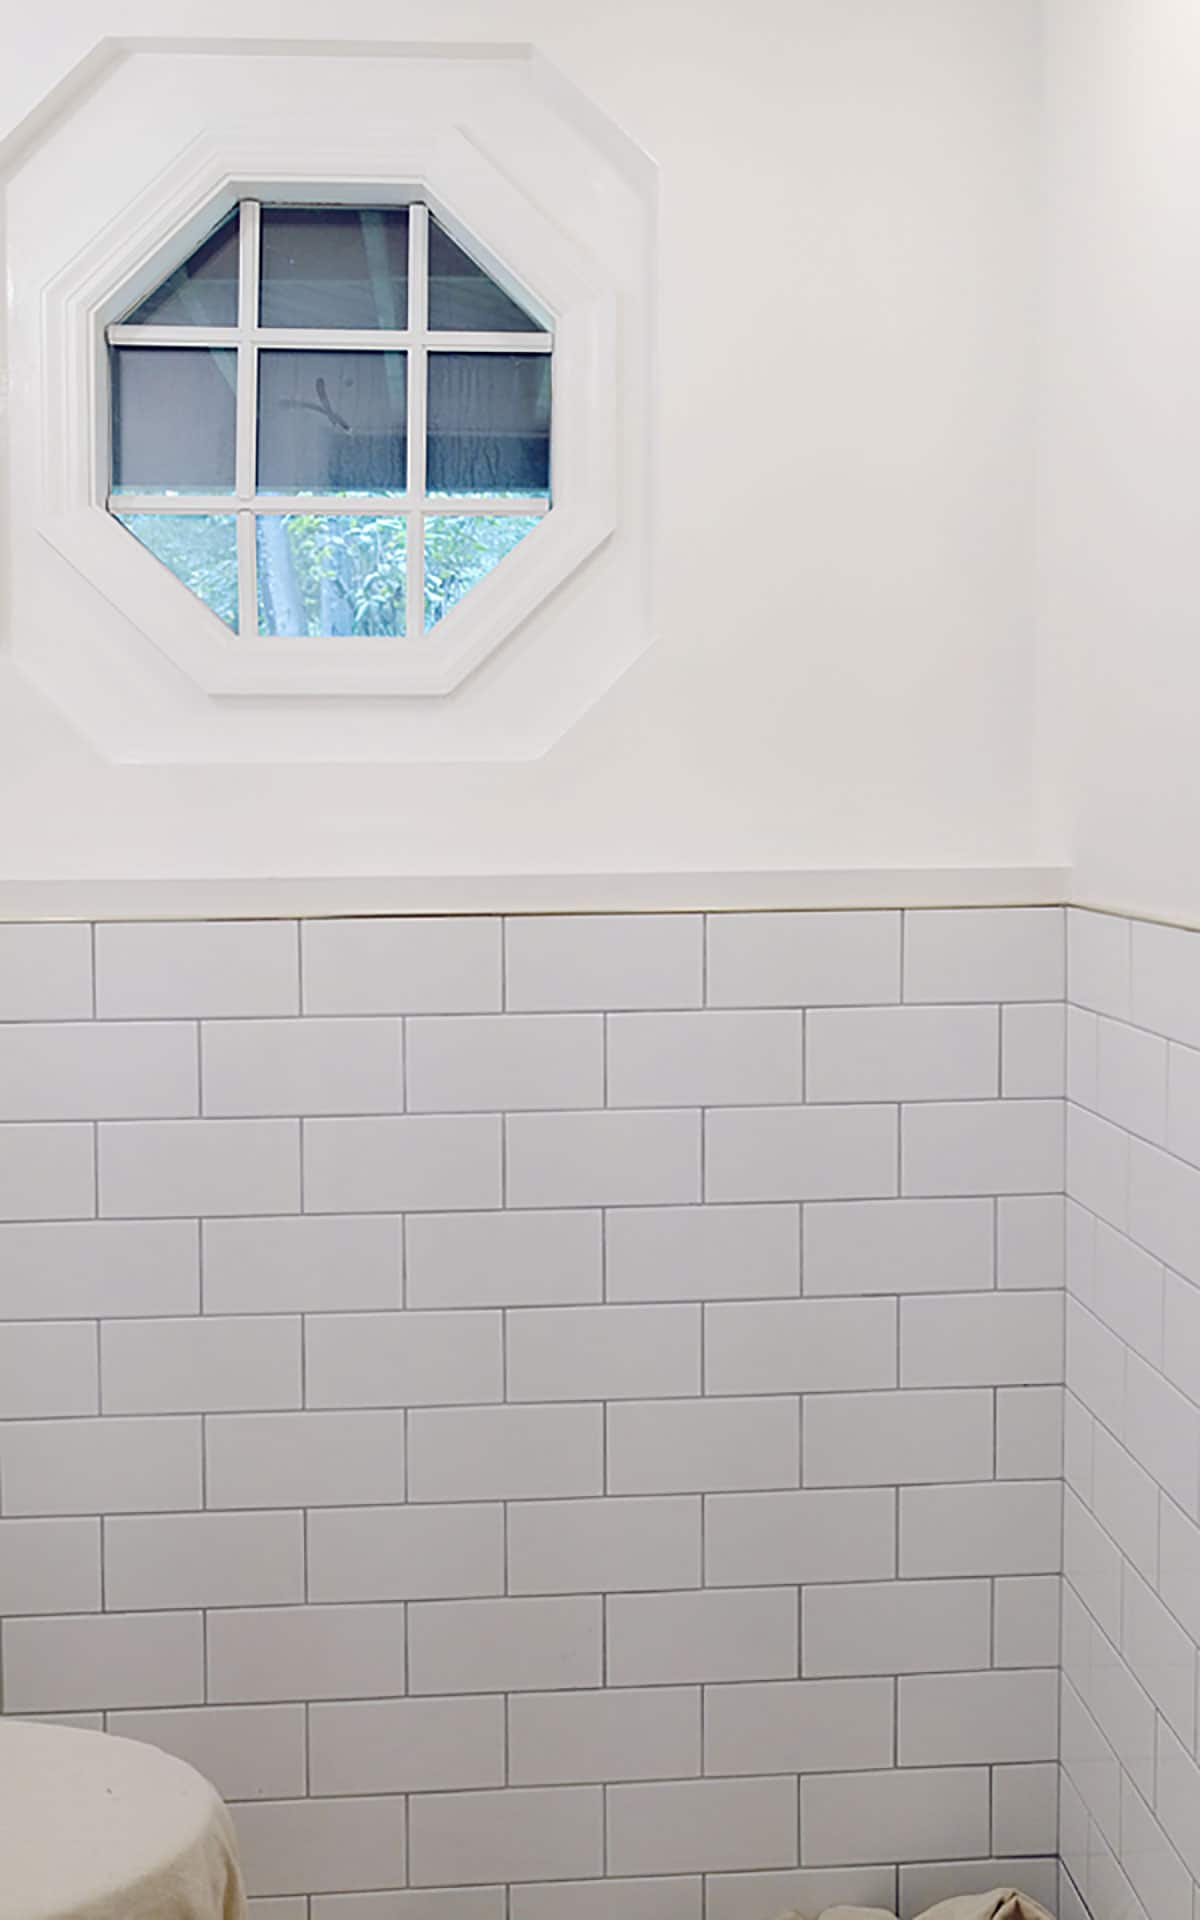 Laying the white subway tile in the bathroom renovation